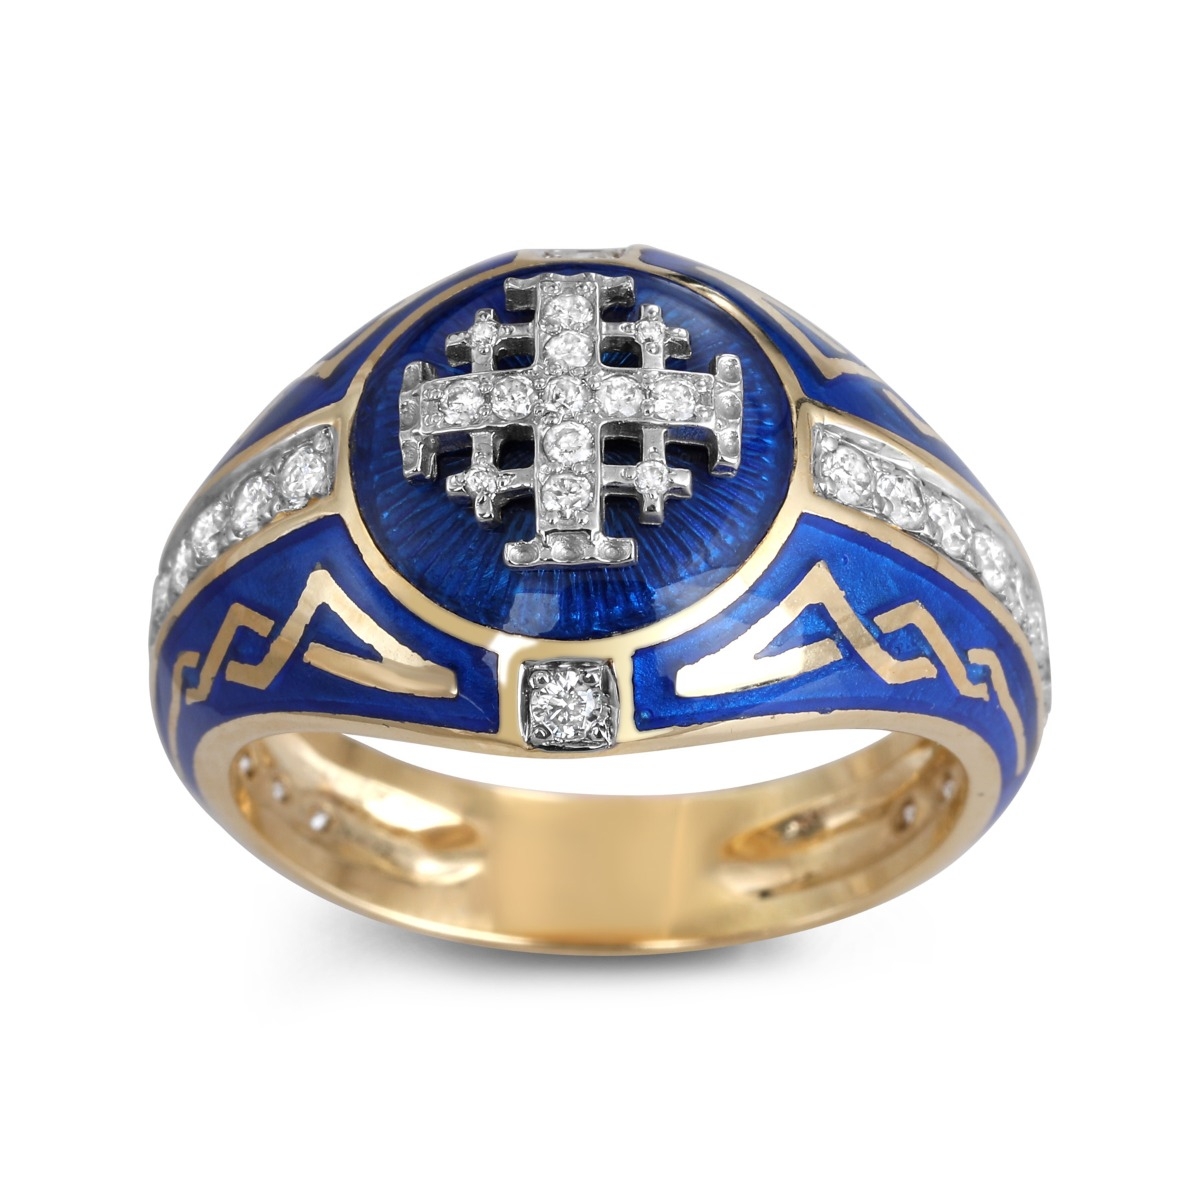 14K Gold Enamel and Diamond Rounded Men’s Jerusalem Cross Ecclesiastical Signet Ring with Channel Diamond Accents - 1